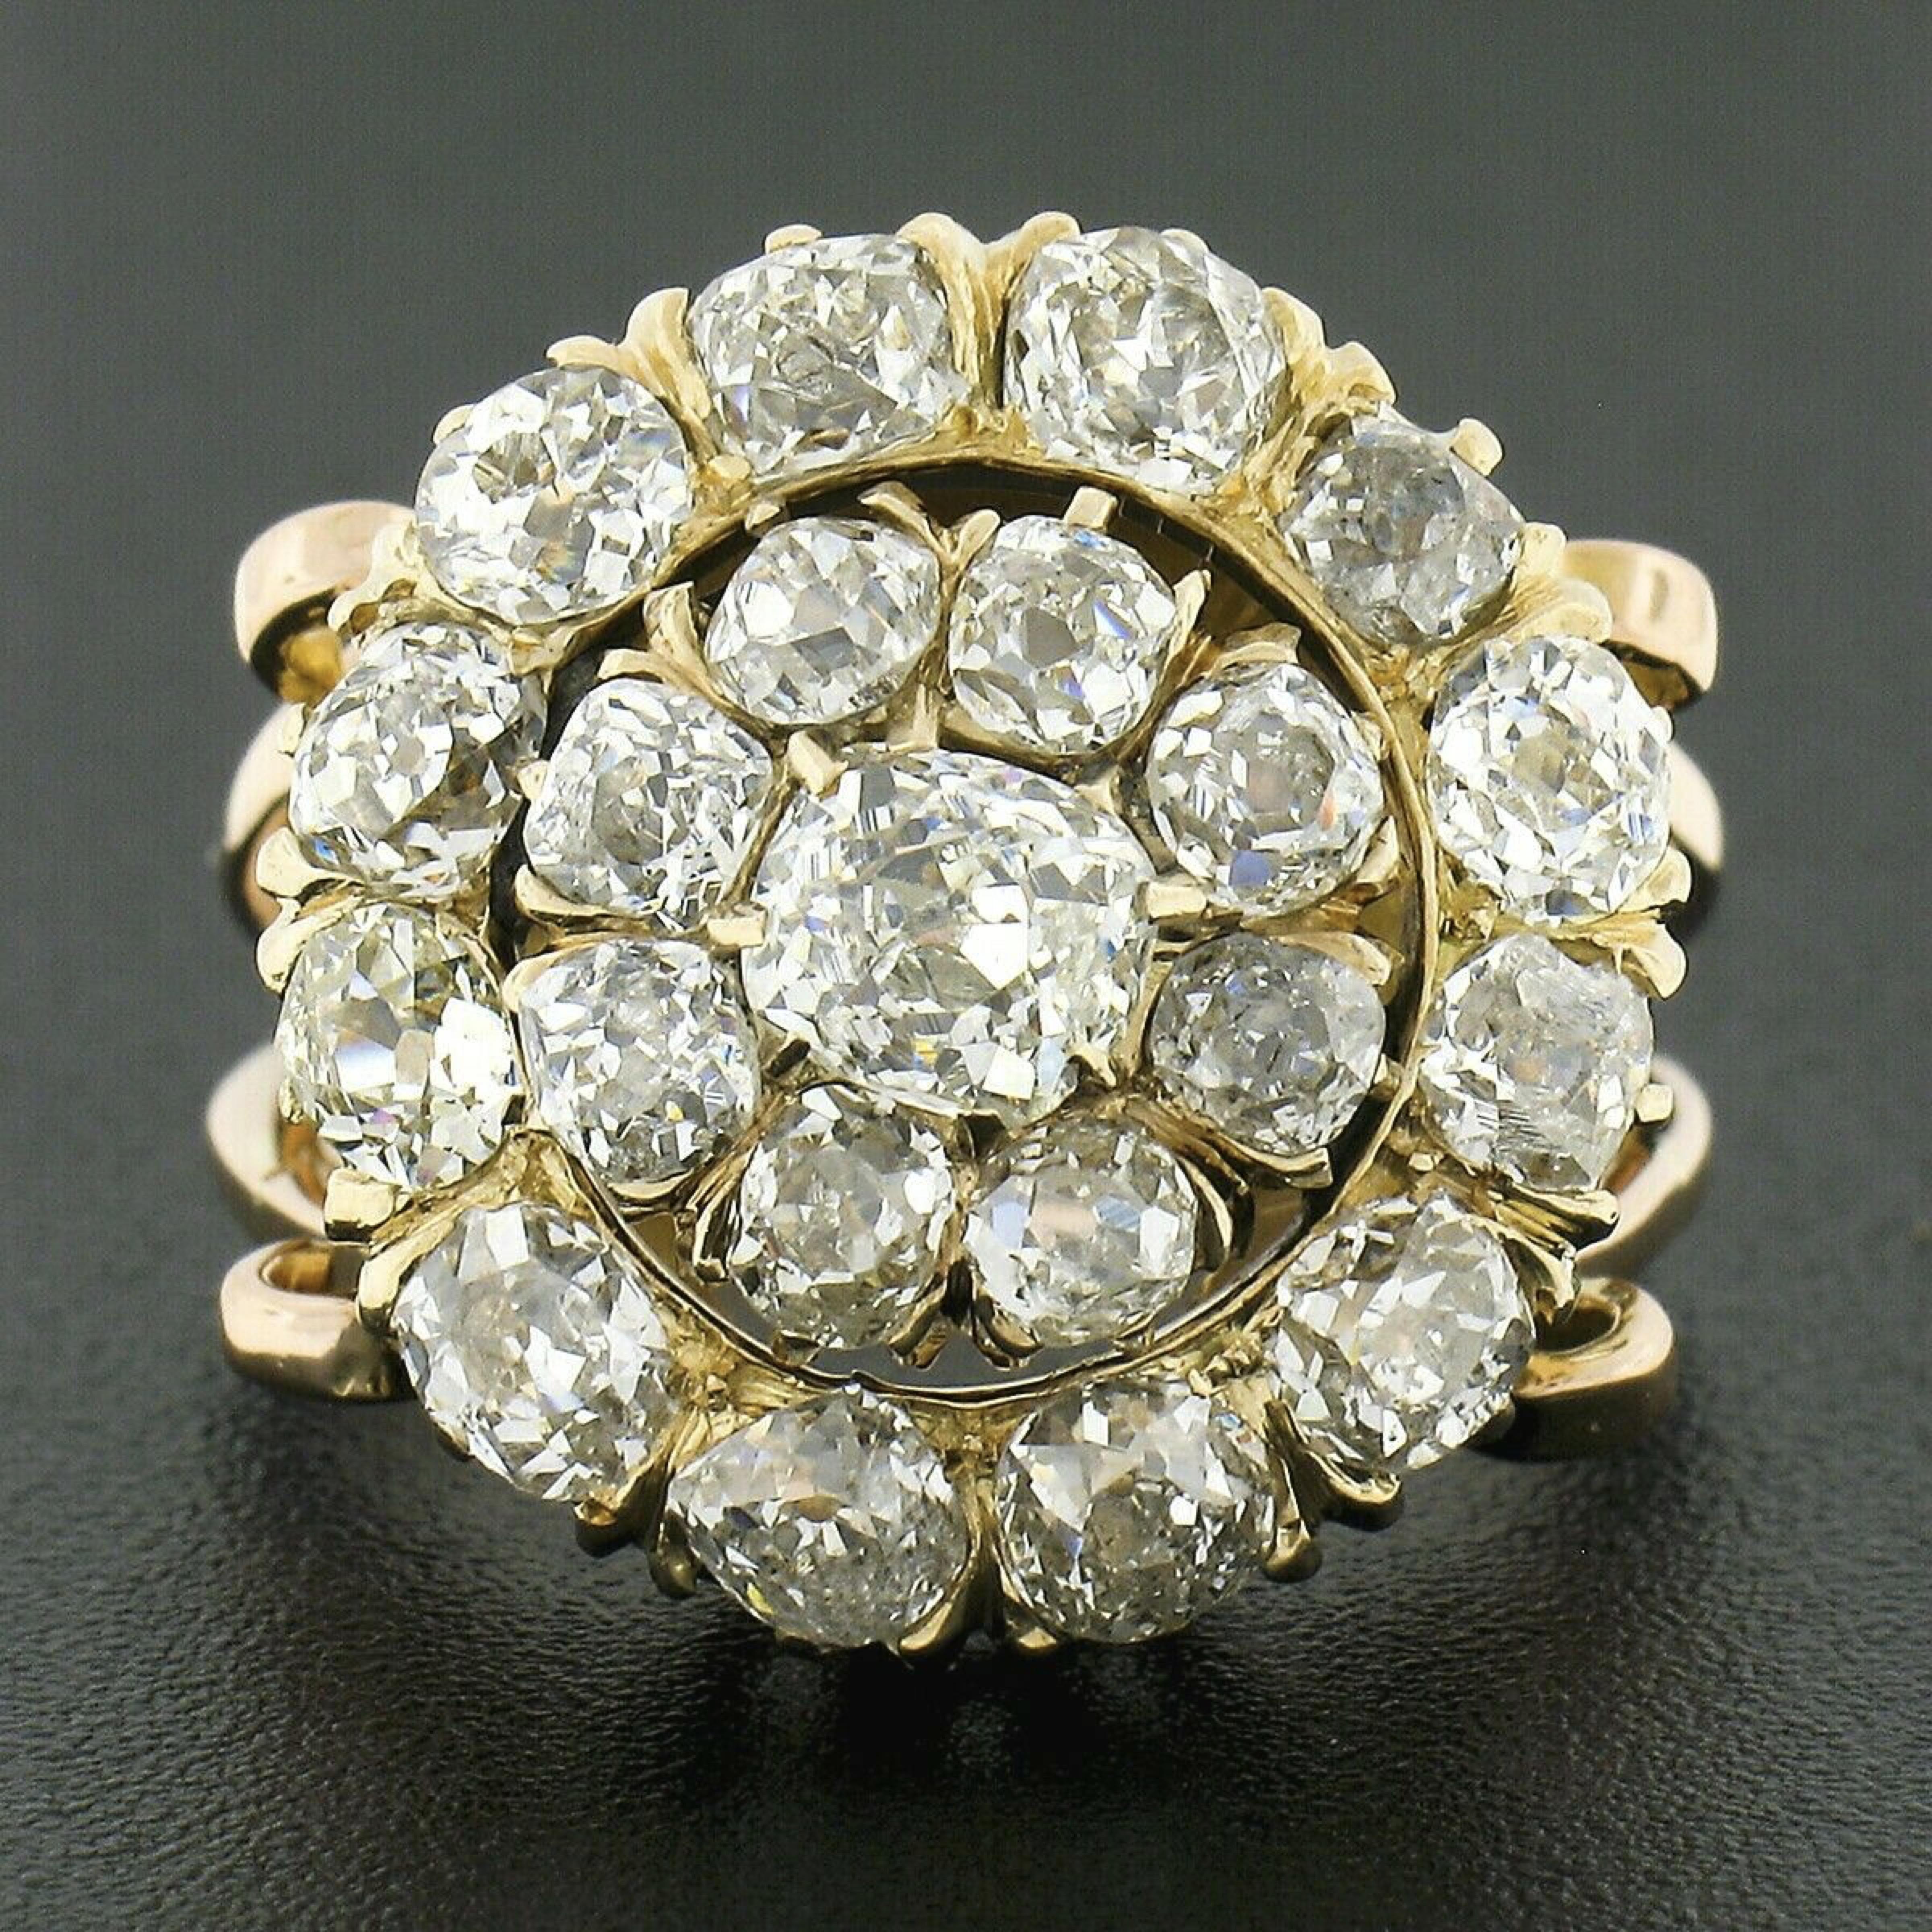 This truly breathtaking antique diamond ring is crafted from solid 18k rose and yellow gold during the Victorian period and features a platter style with a stunning cluster of chunky old mine cut diamonds throughout its top. These fine diamonds are